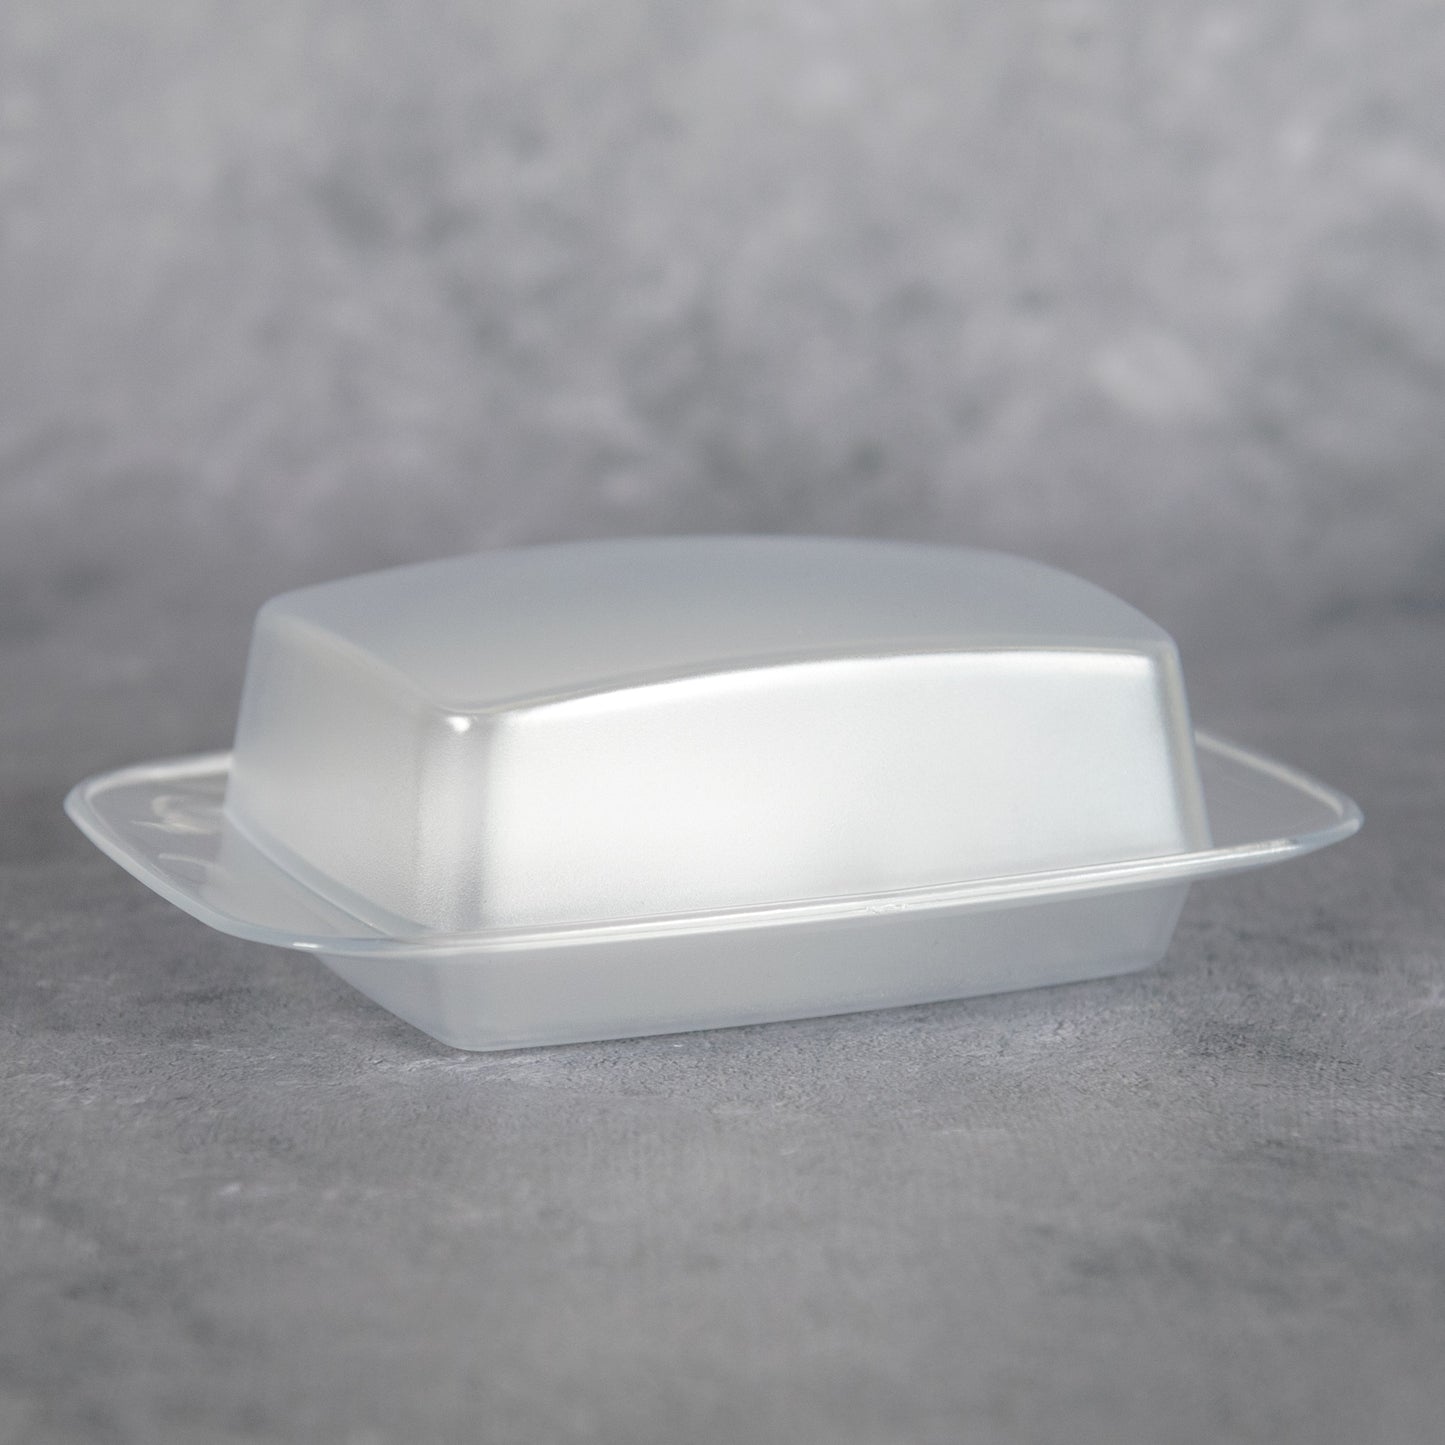 Frosted Plastic Butter Storage Dish